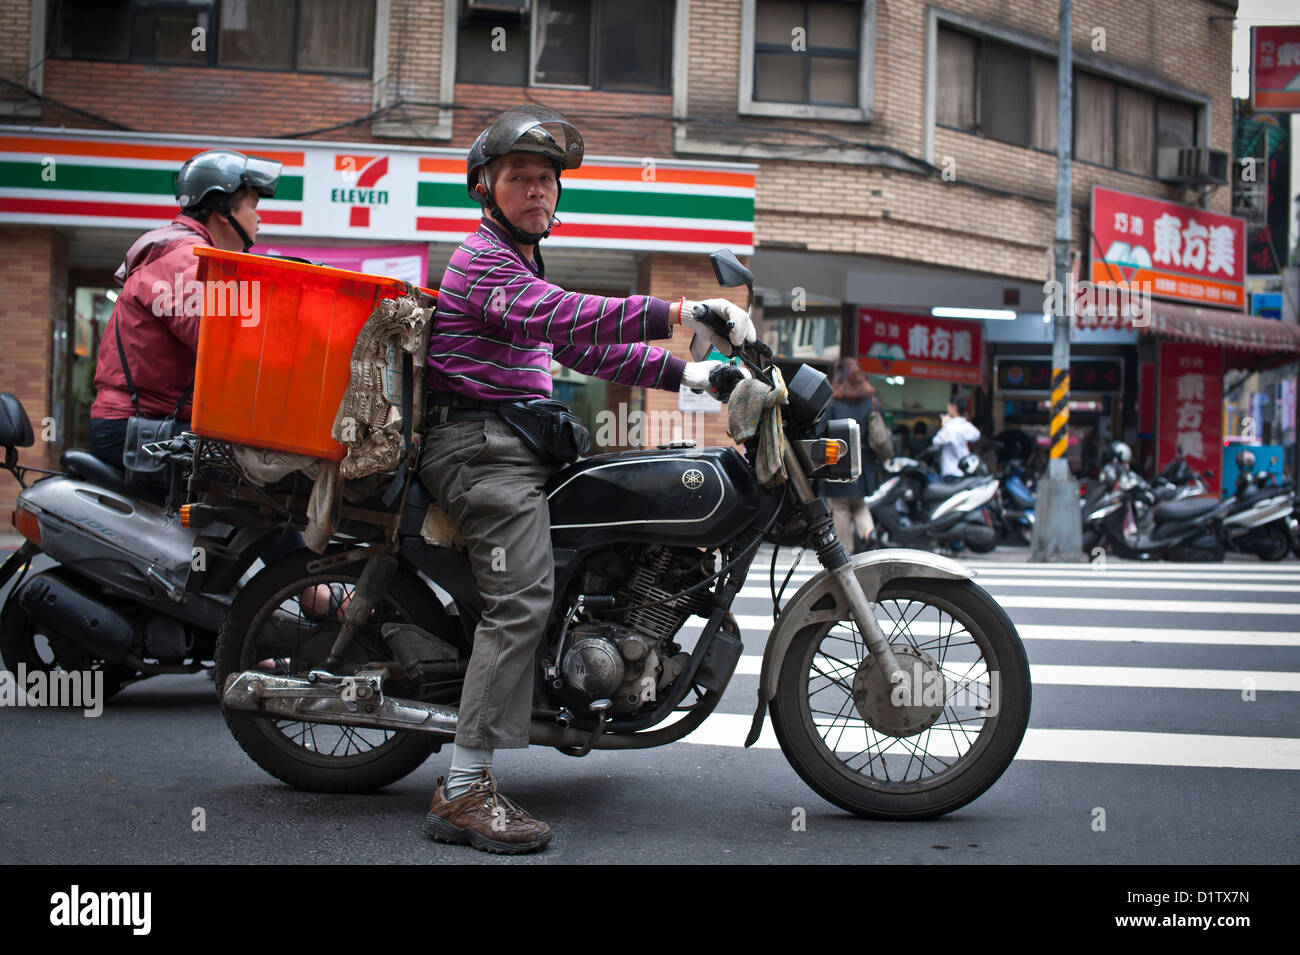 Motorcyclist stopped at intersection, Taipei Stock Photo